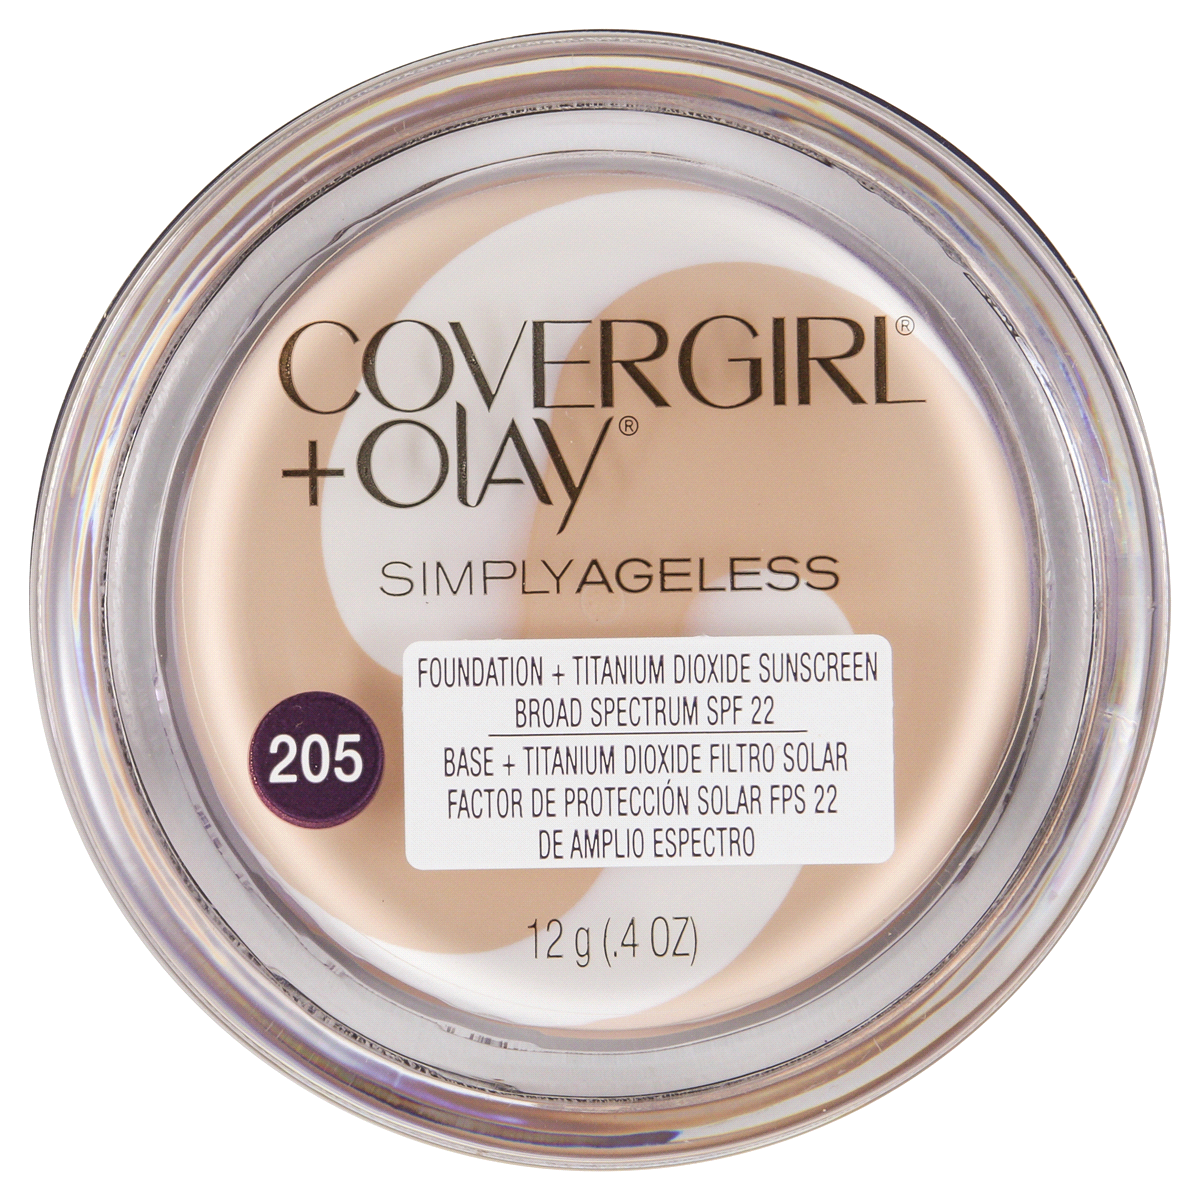 slide 16 of 21, Covergirl + Olay Simply Ageless Instant Wrinkle Defying Foundation, Ivory, 0.4 oz